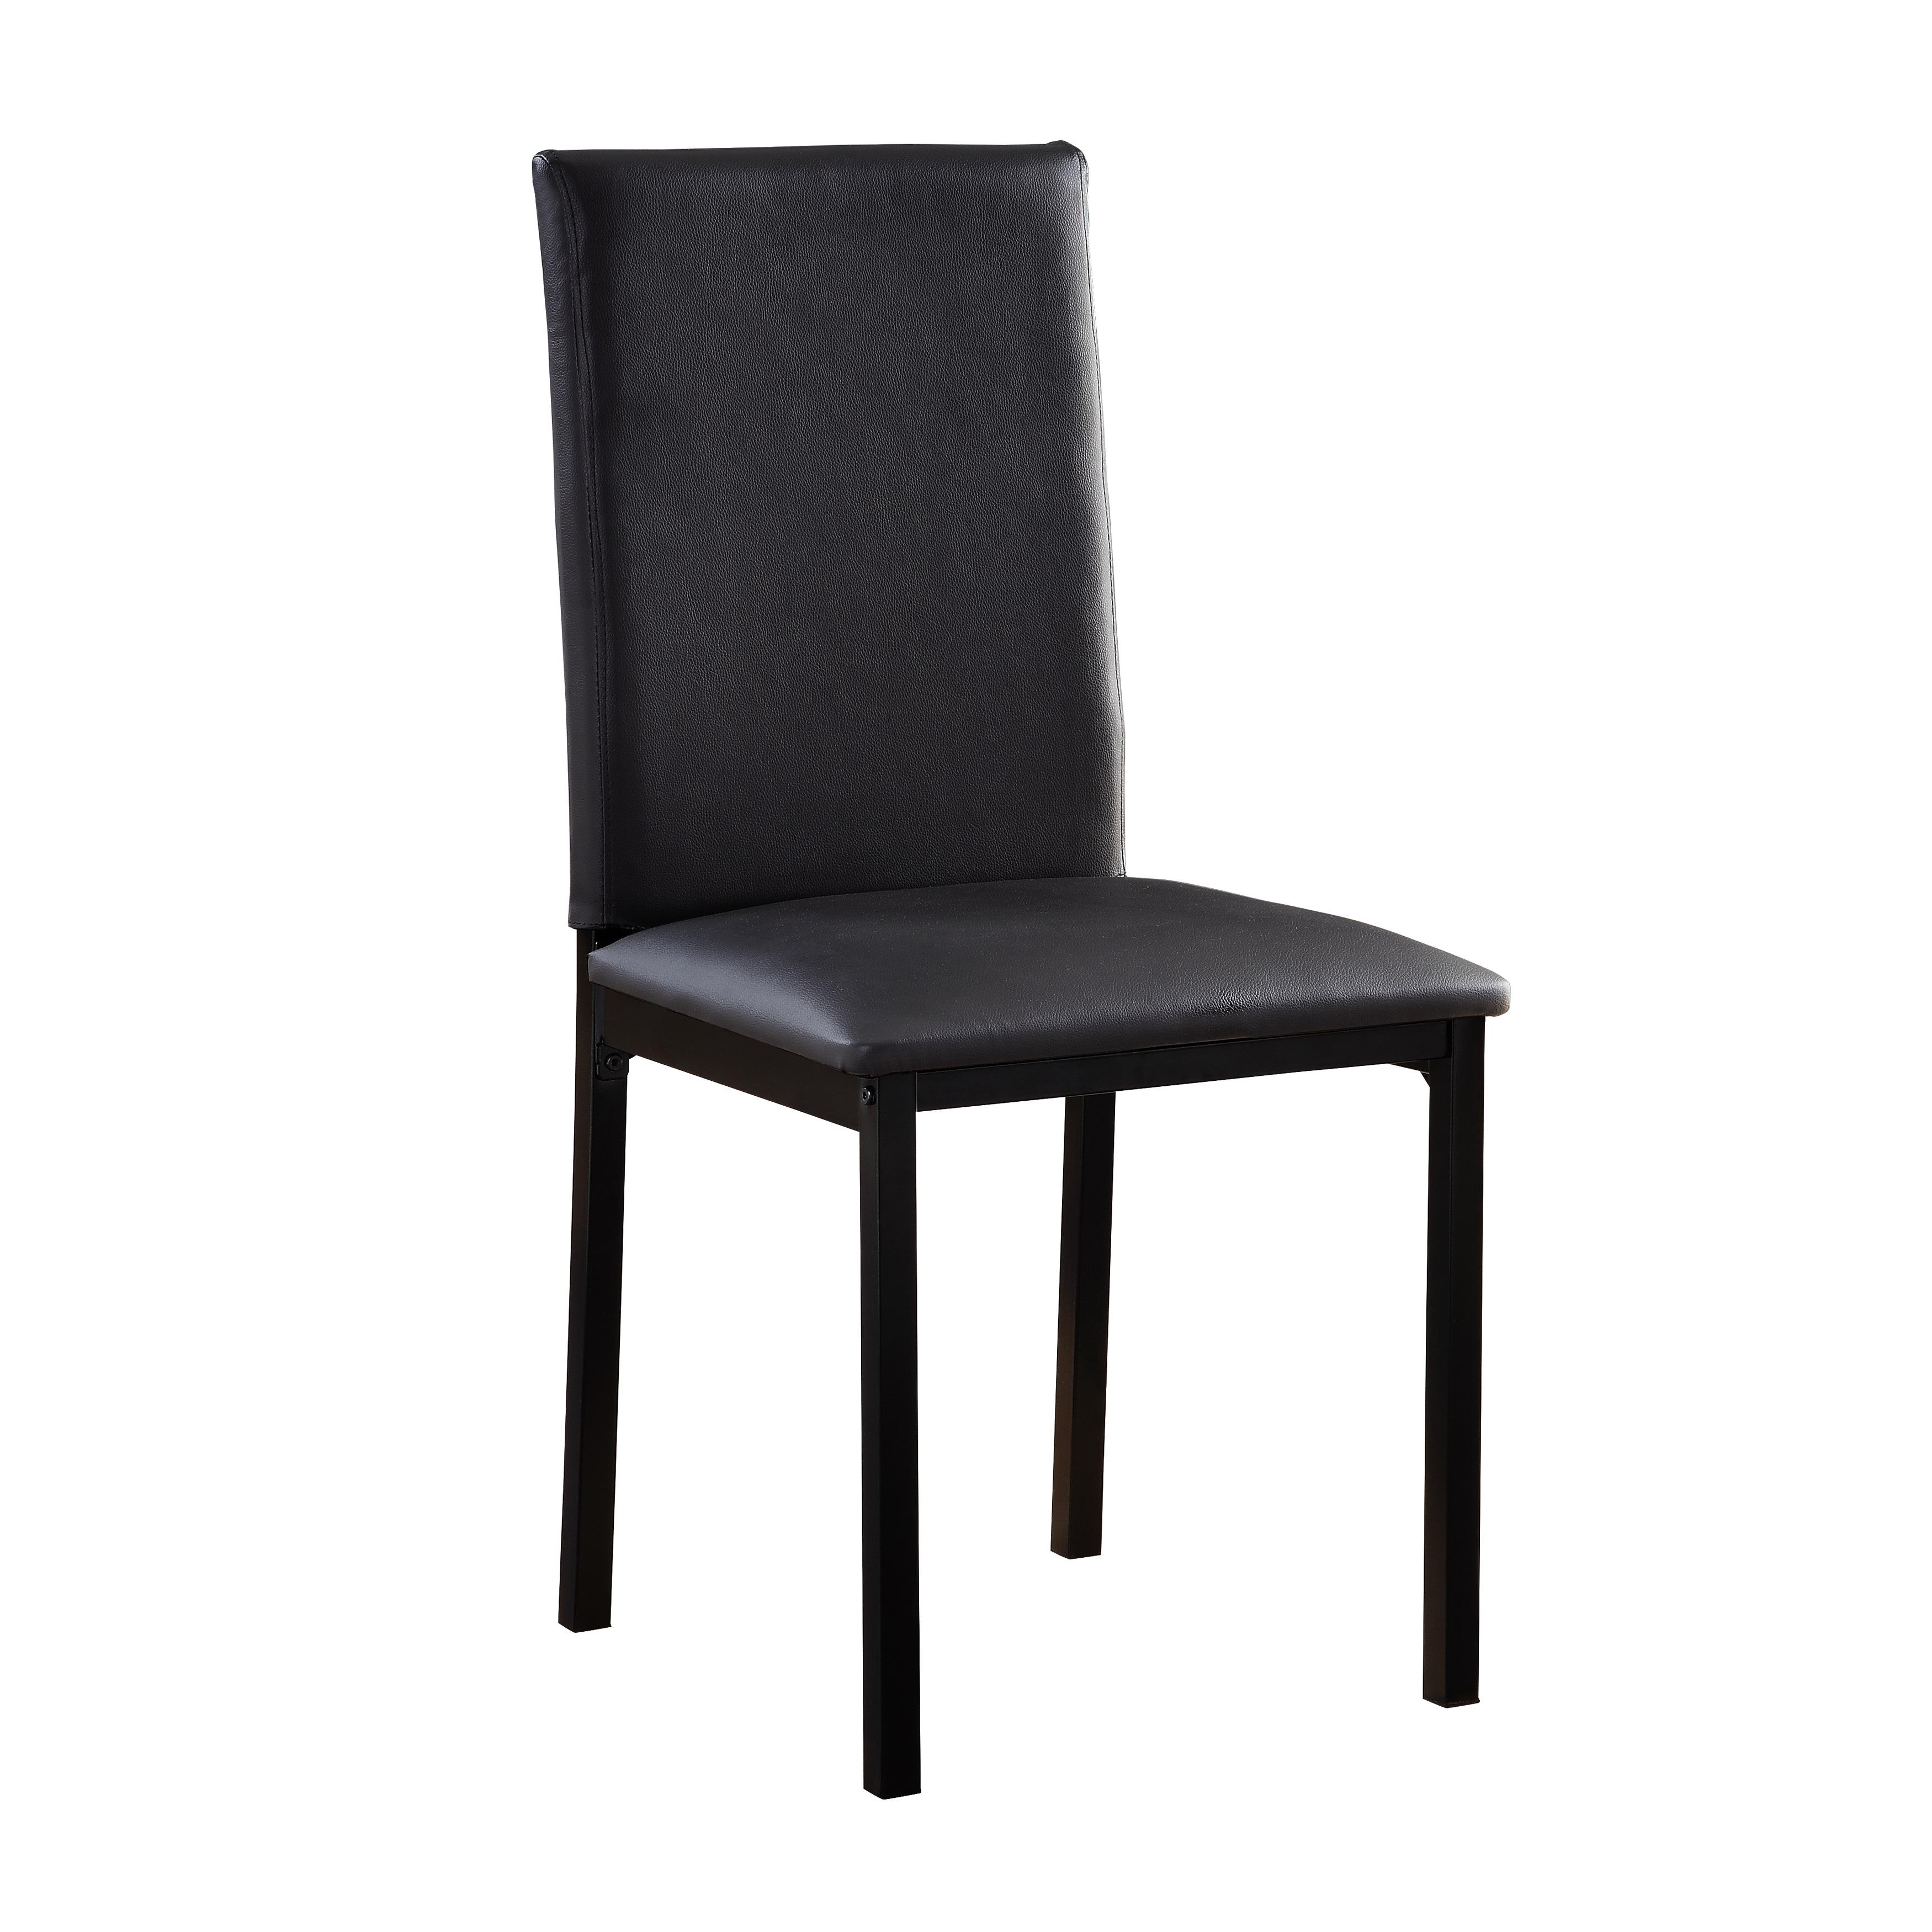 Transitional Side Chair Set 2601BK-S1 Tempe 2601BK-S1 in Black Faux Leather